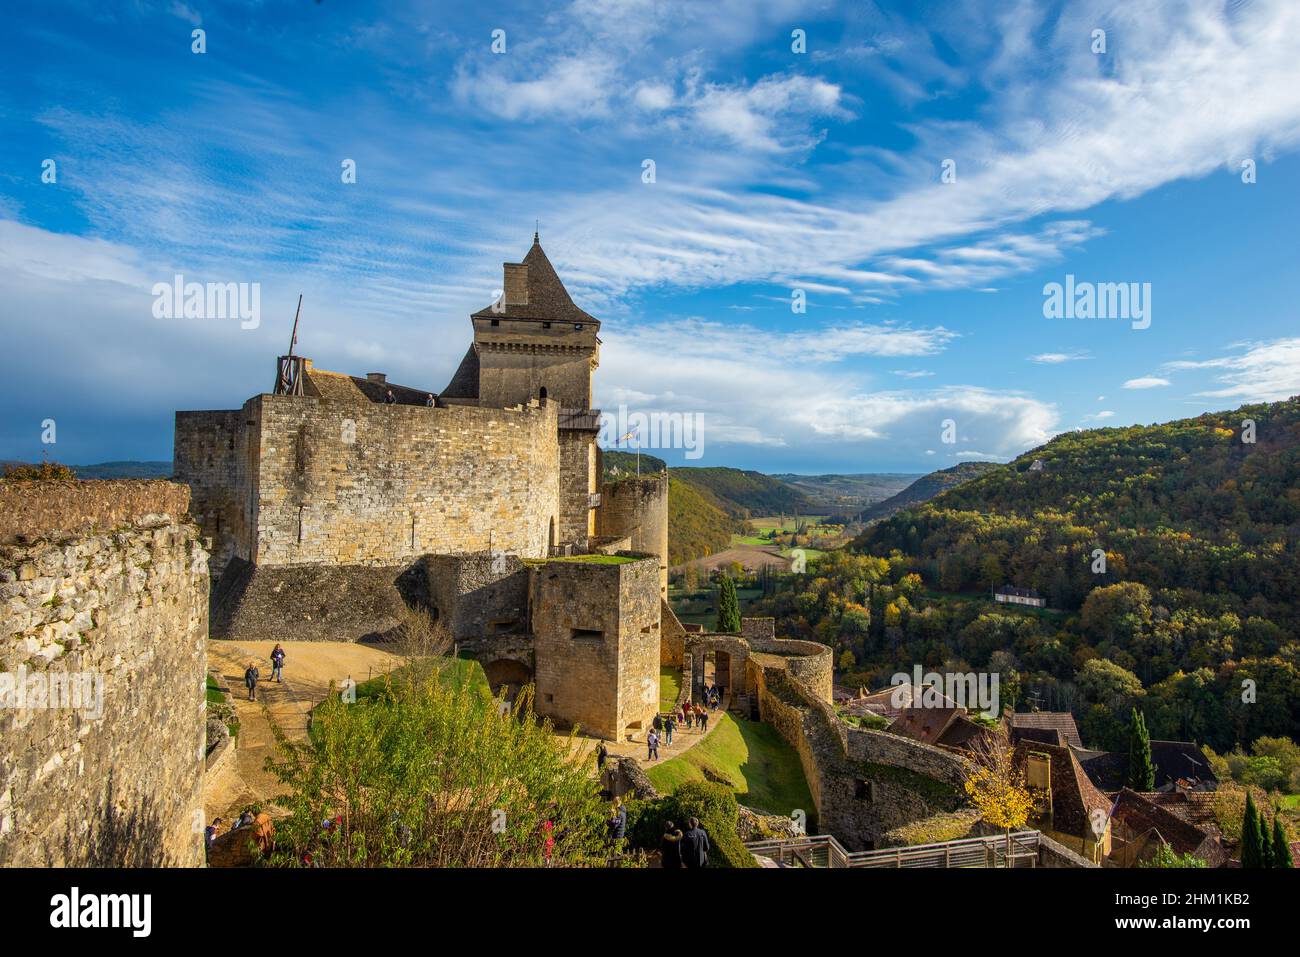 Castelnaud-la-Chapelle, France - November 1, 2021: the medieval fortress of Castelnaud in Perigord, France, taken on a partly sunny autumn afternoon w Stock Photo